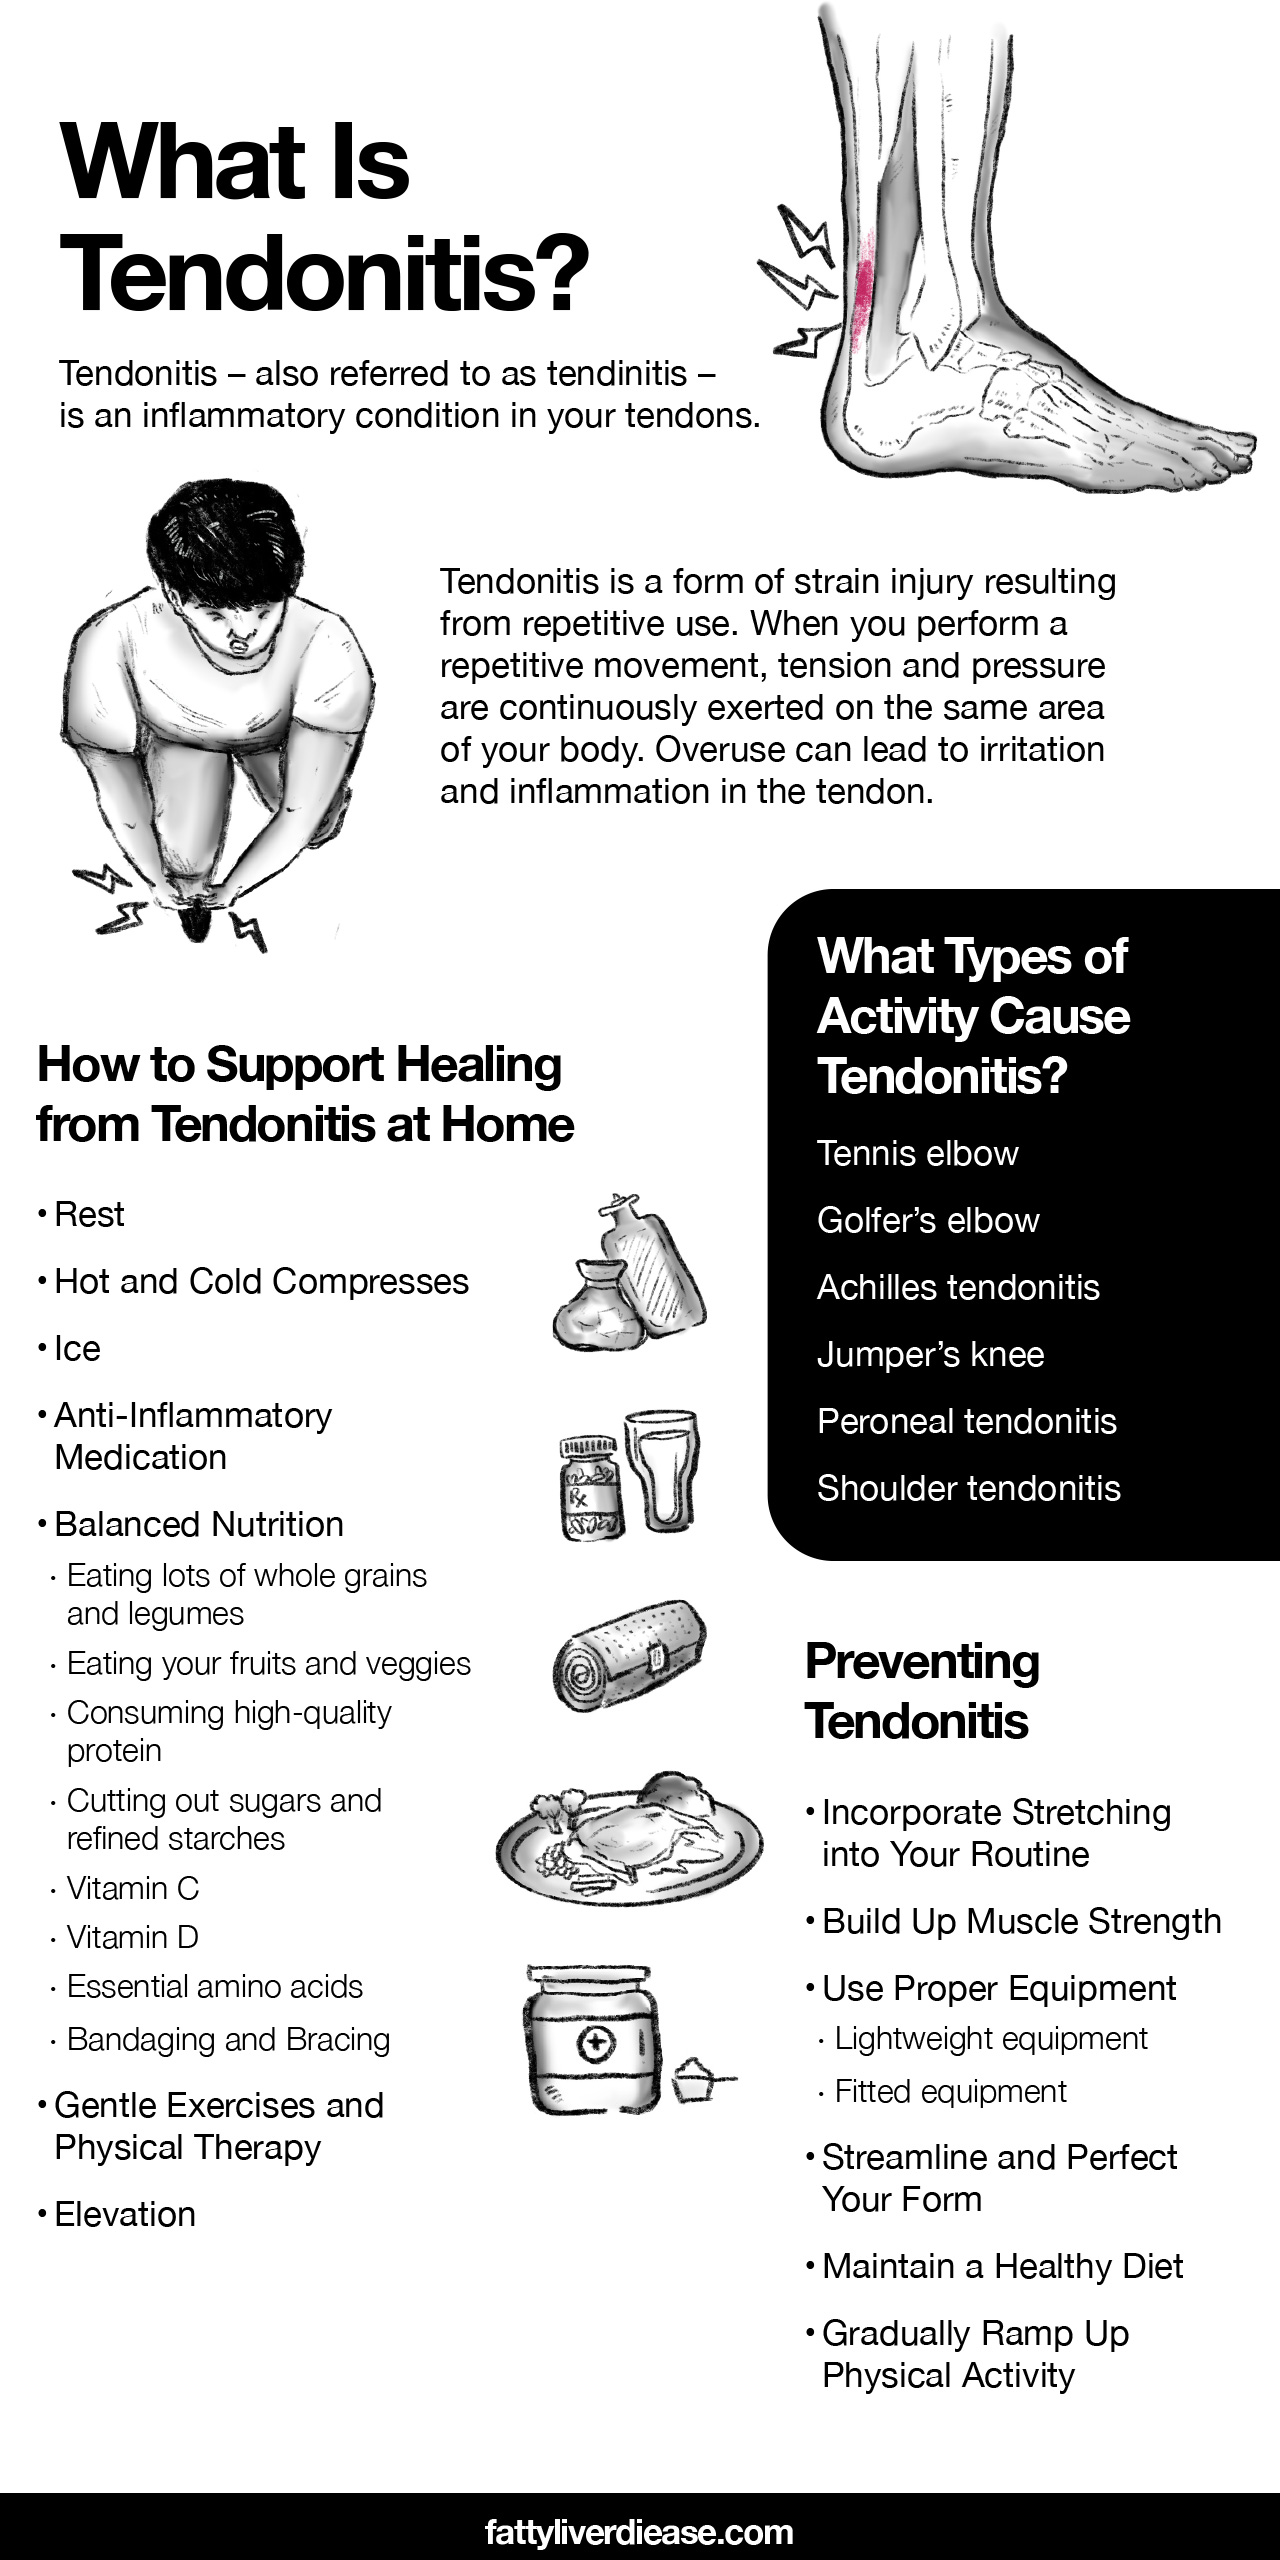 What Is Tendonitis?